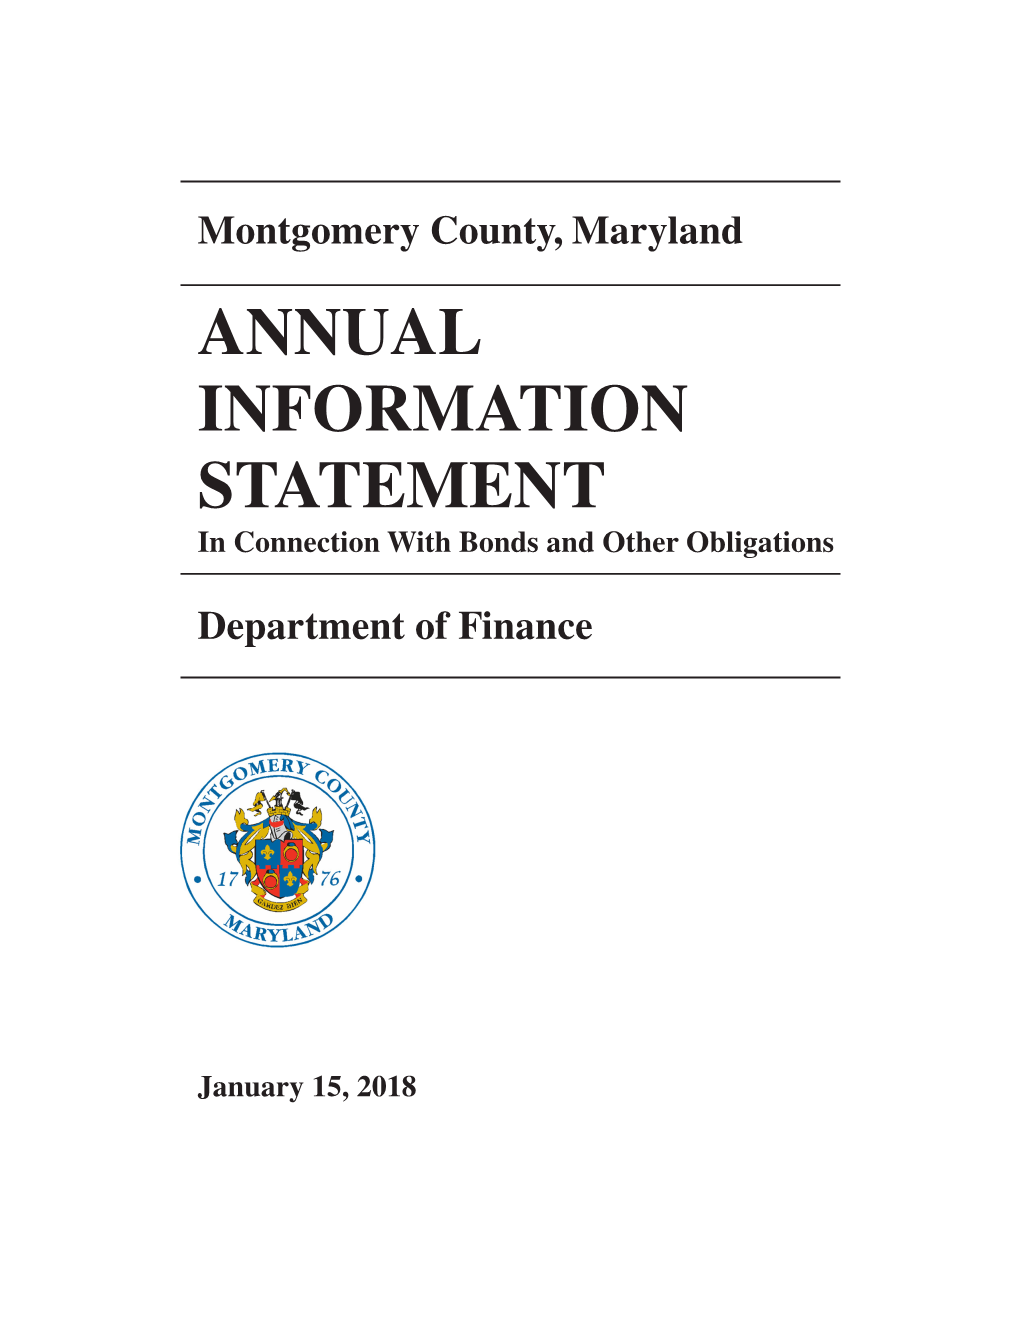 ANNUAL INFORMATION STATEMENT in Connection with Bonds and Other Obligations